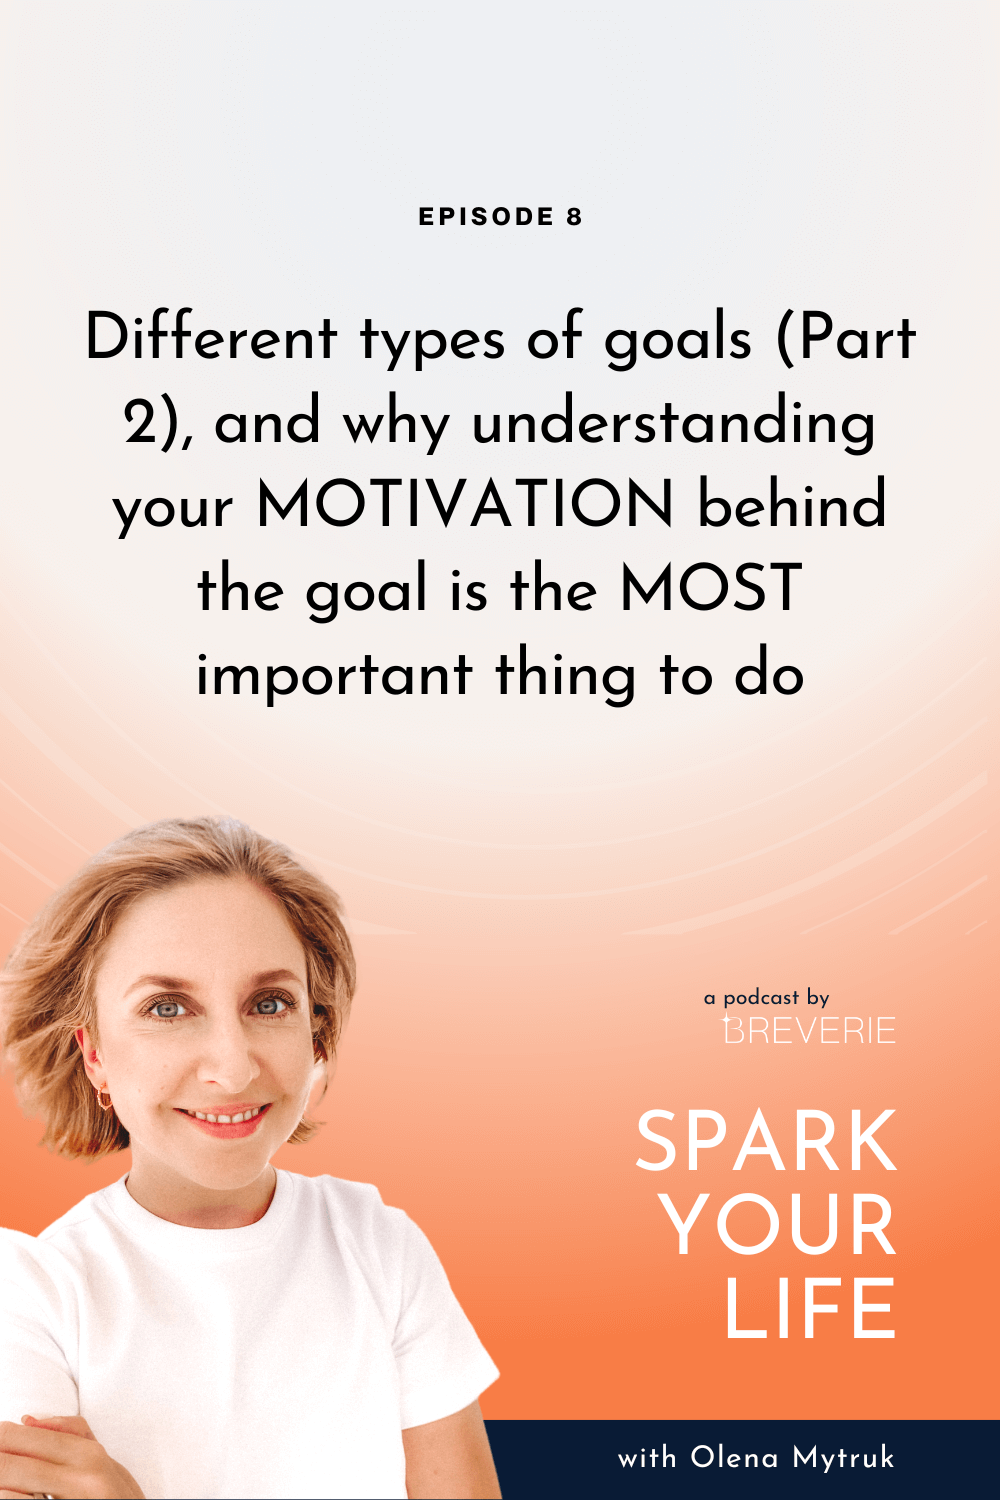 Spark Your Life Podcast | Olena Mytruk | Different types of goals (Part 2), and why understanding your MOTIVATION behind the goal is the MOST important thing to do